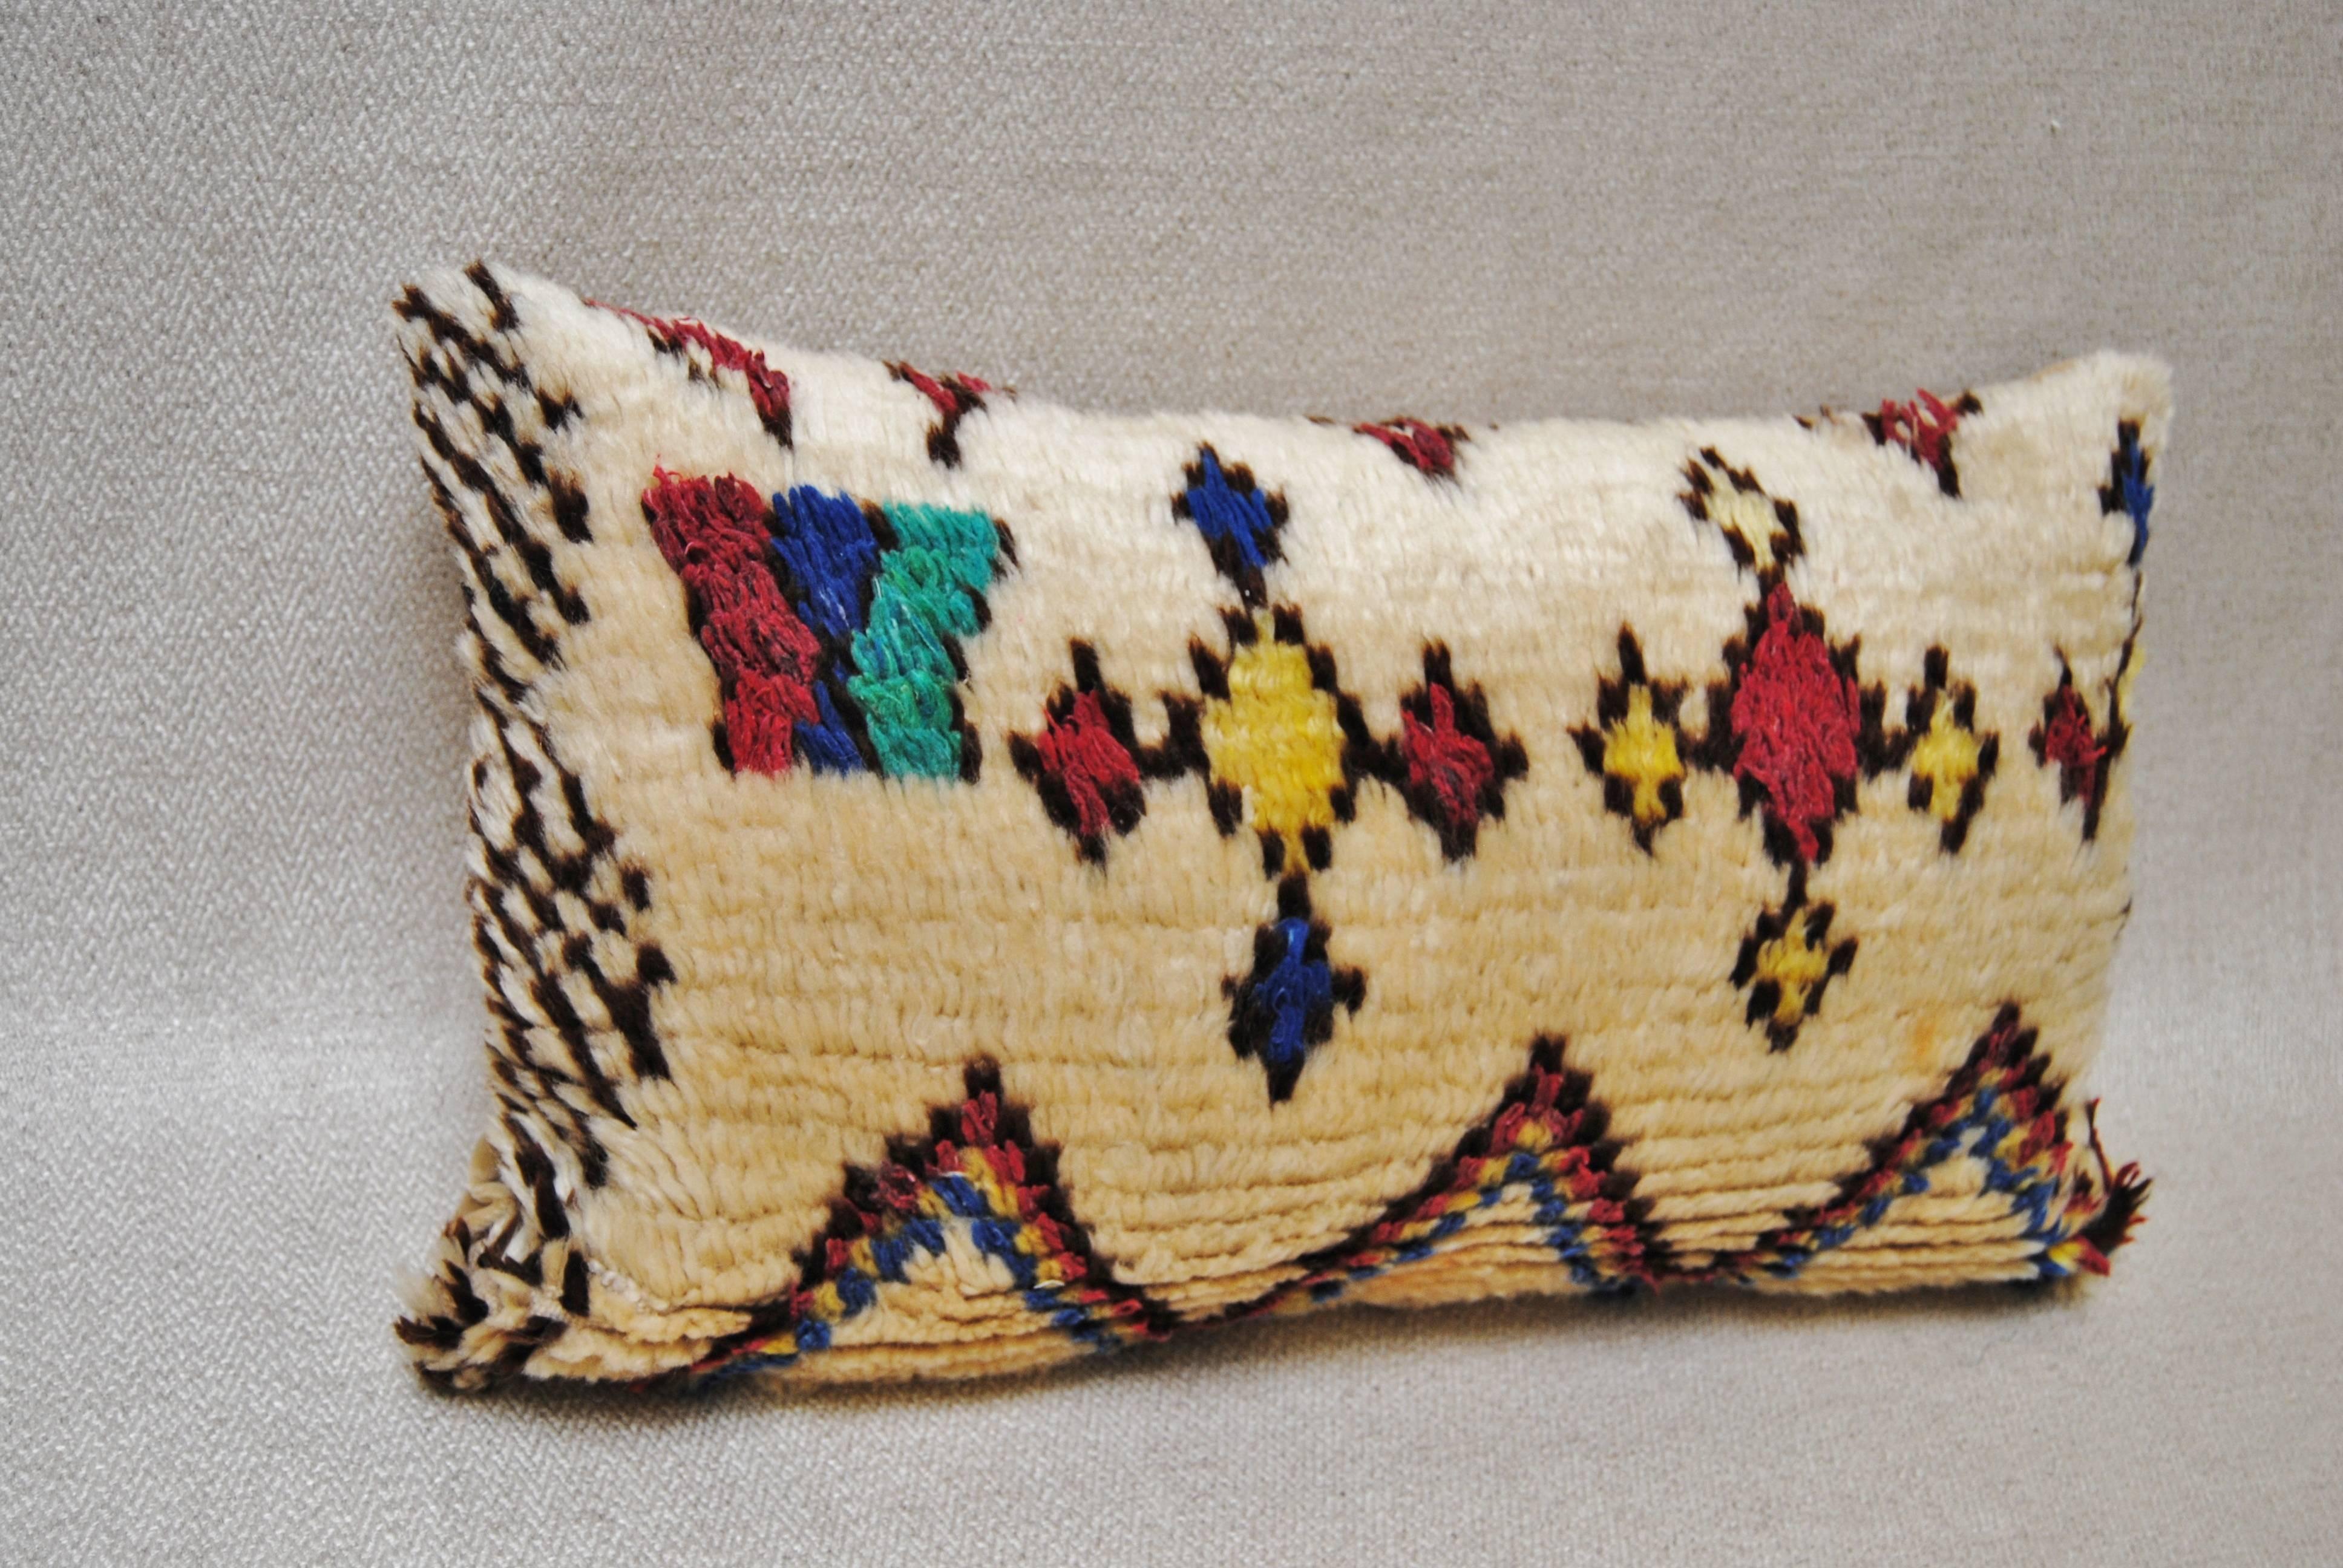 Custom pillow cut from a vintage hand-loomed wool Moroccan Azilal rug from the Atlas Mountains. Wool is soft and lustrous with all natural dyes. Whimsical tribal designs in vibrant colors. Pillow is backed in cream mohair, filled with an insert of